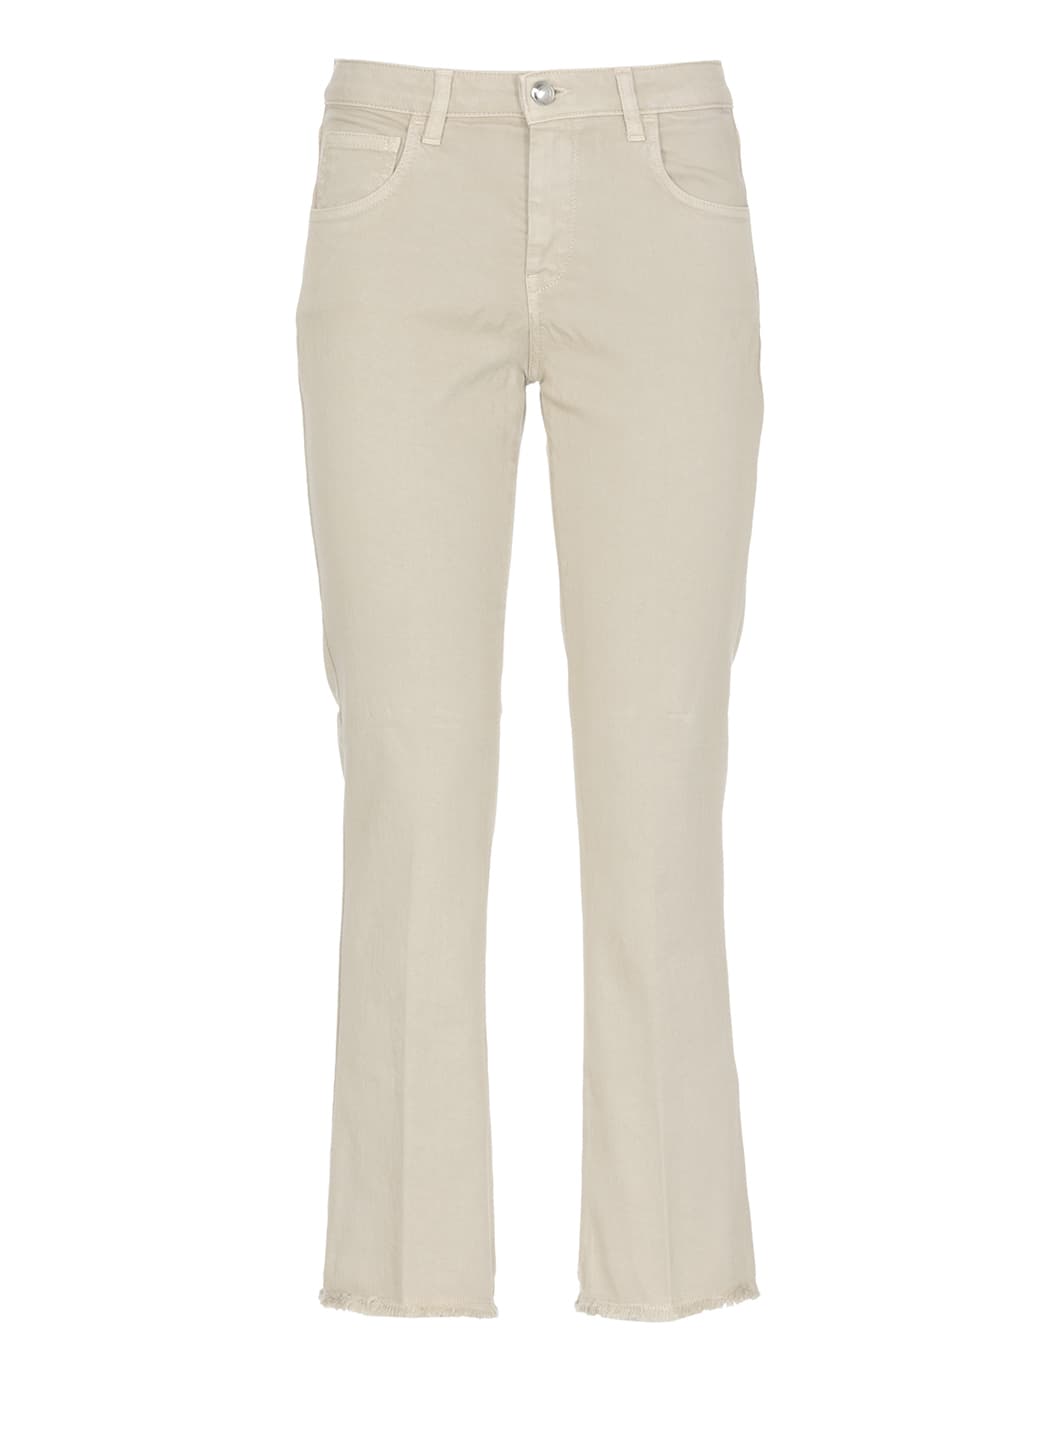 Fay Cotton Stretch Jeans